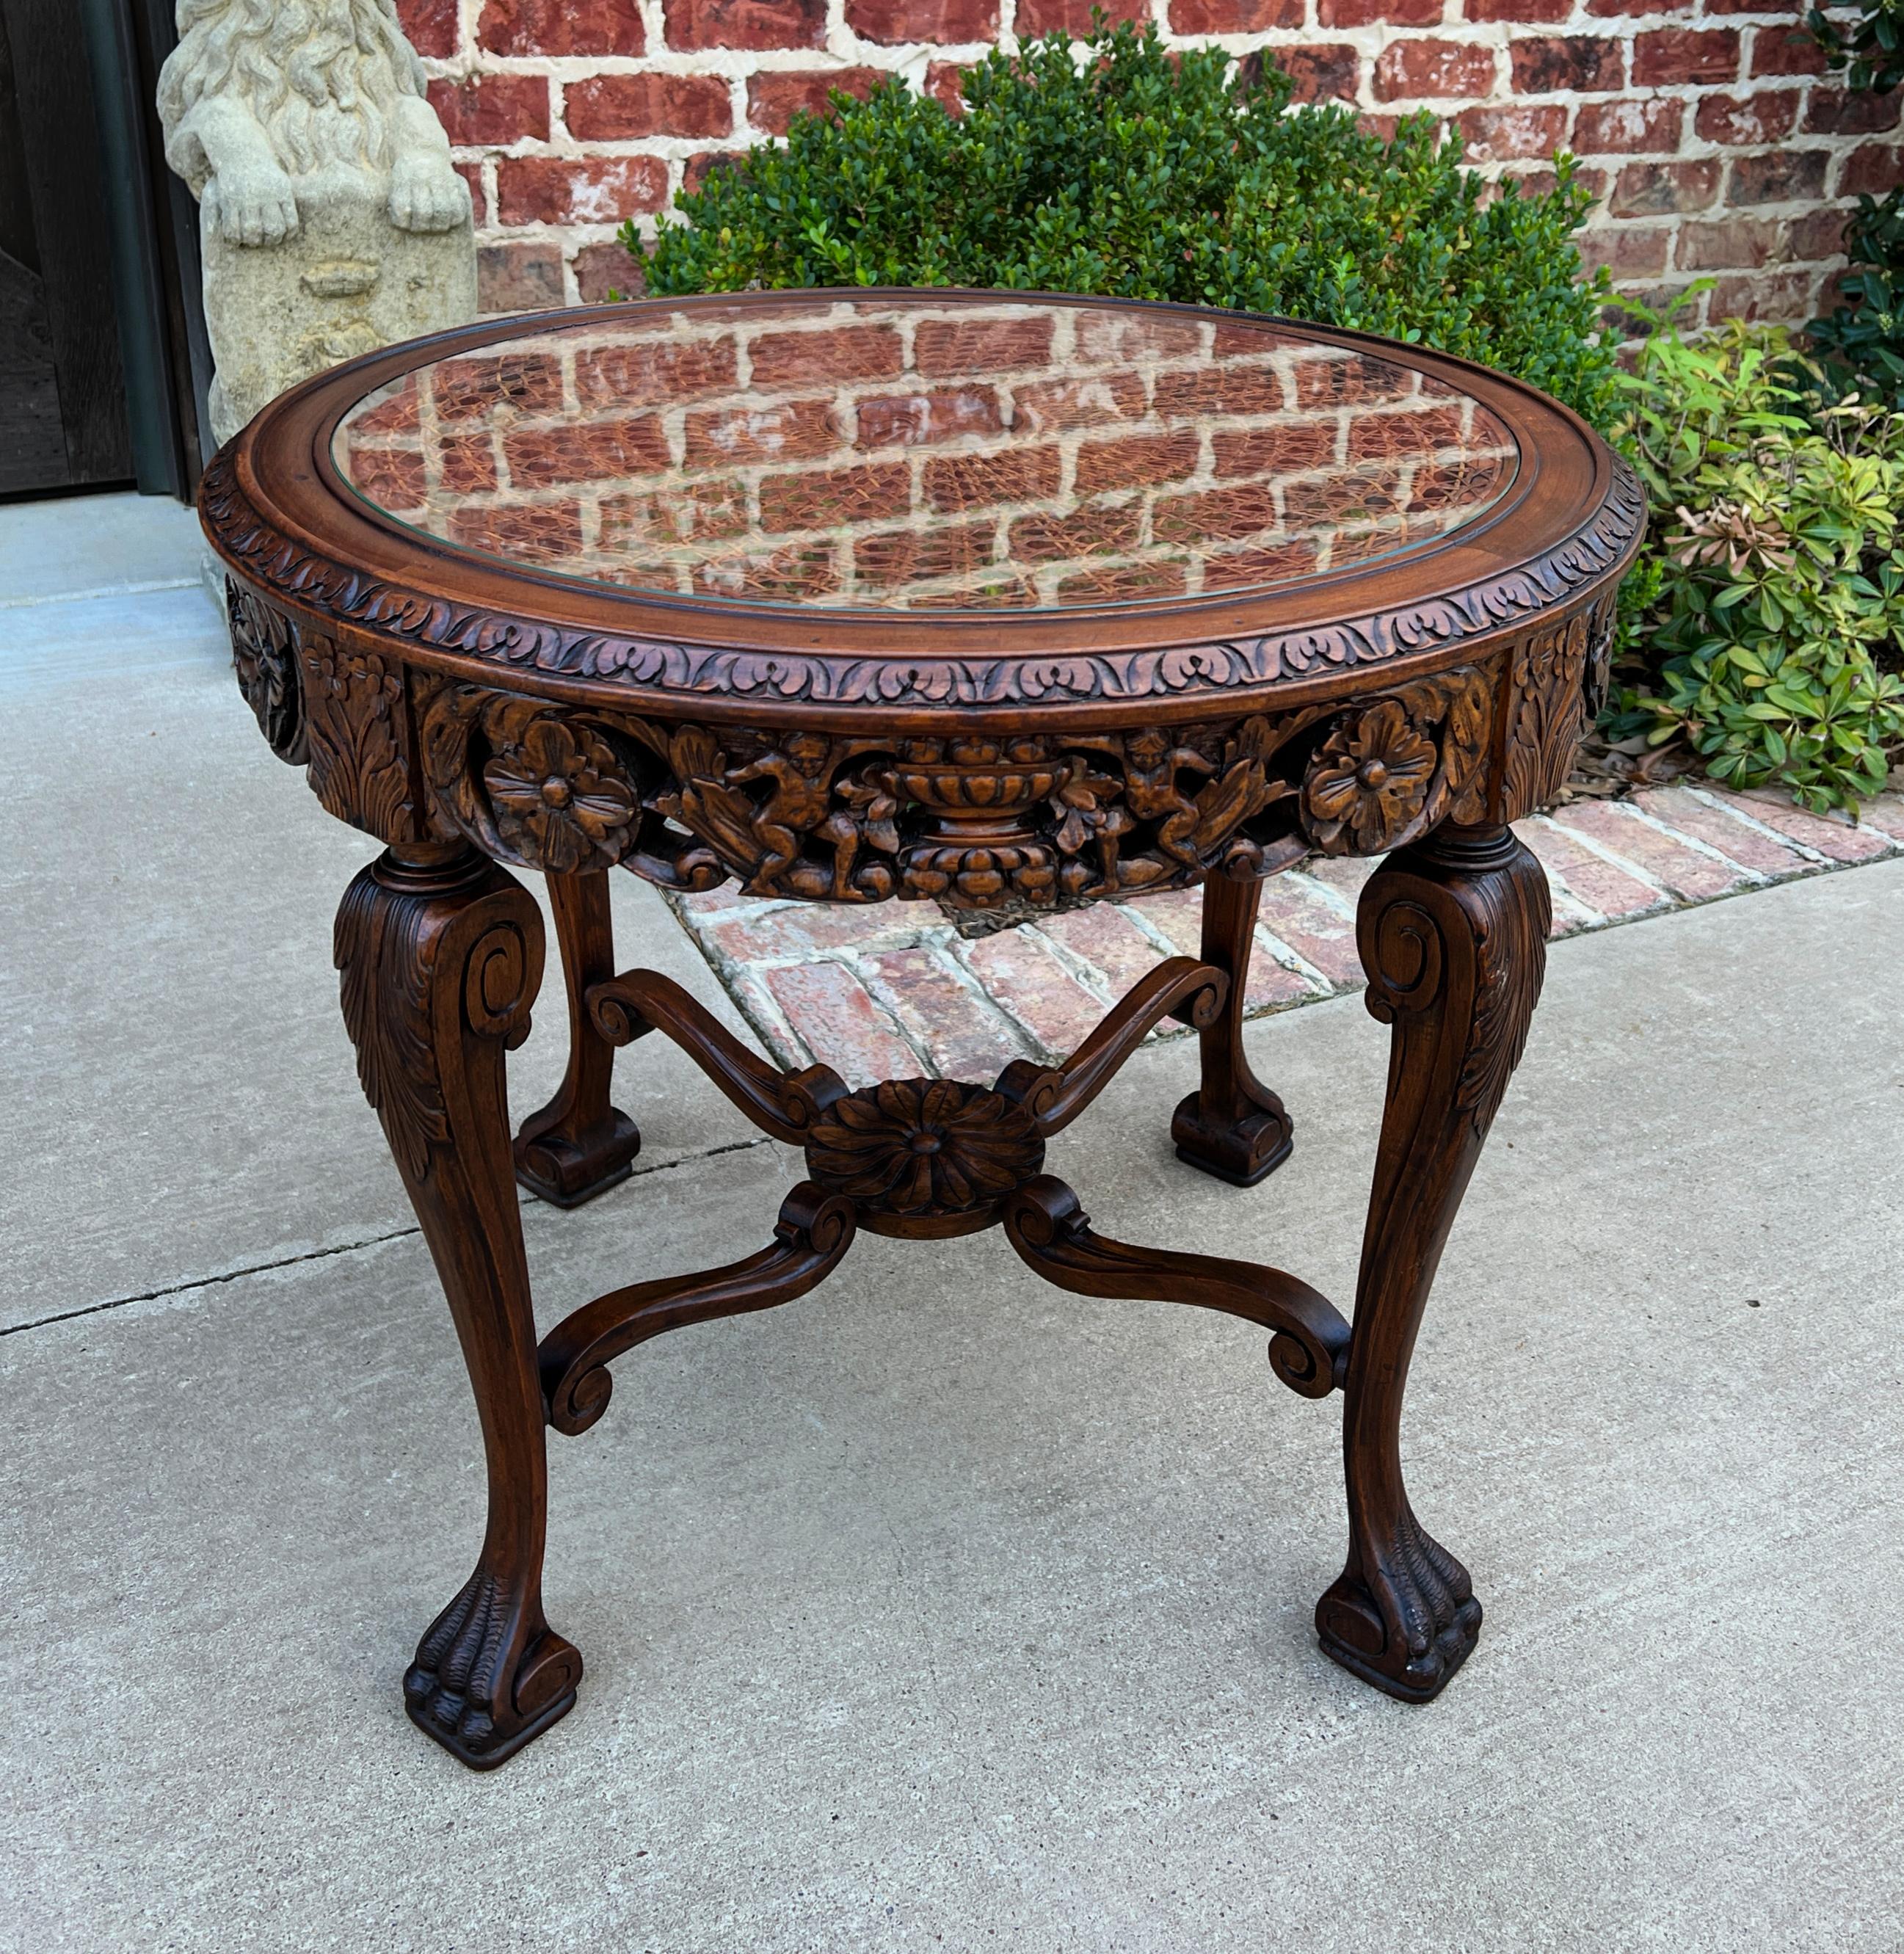 Superb highly carved late 19th century antique walnut round end table, occasional table, bed table~~caned with glass top
~~circa. 1890s
These versatile tables were very popular in late Victorian era French country homes and castles~~~characterized